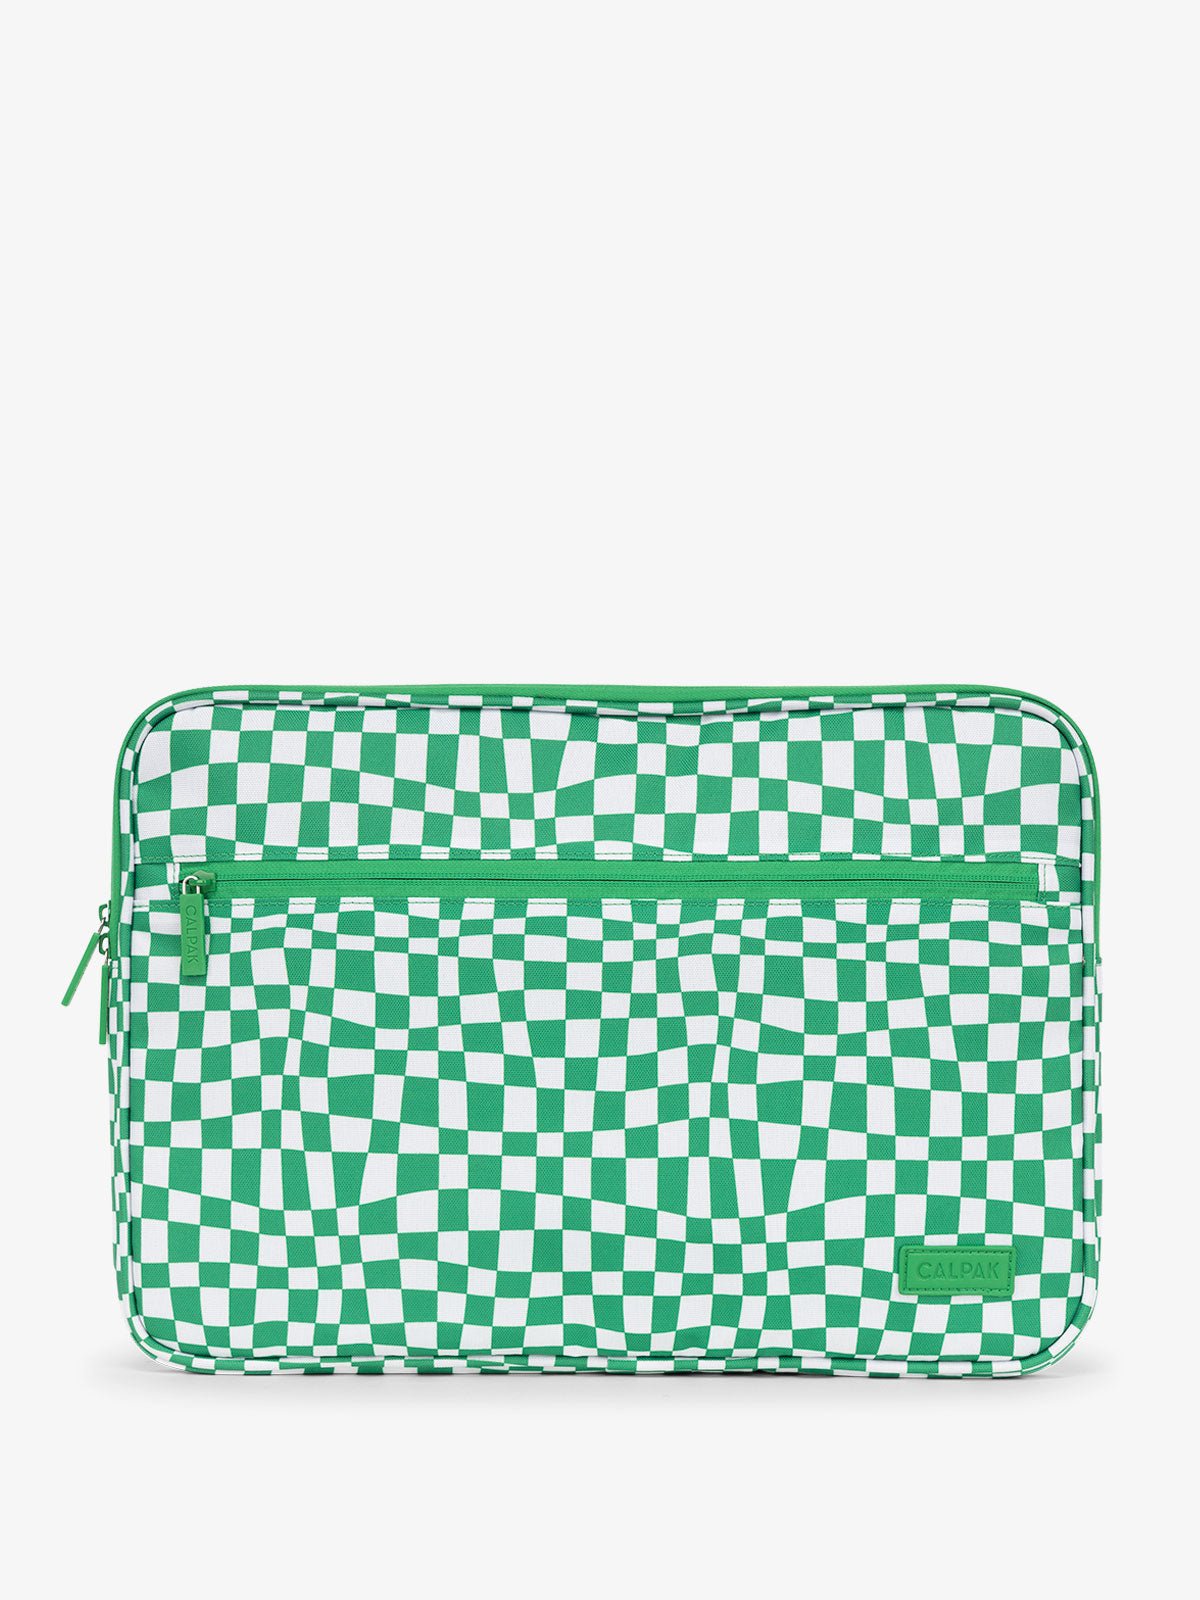 CALPAK 15-17 Inch Padded Laptop with zippered front pocket in green checkerboard